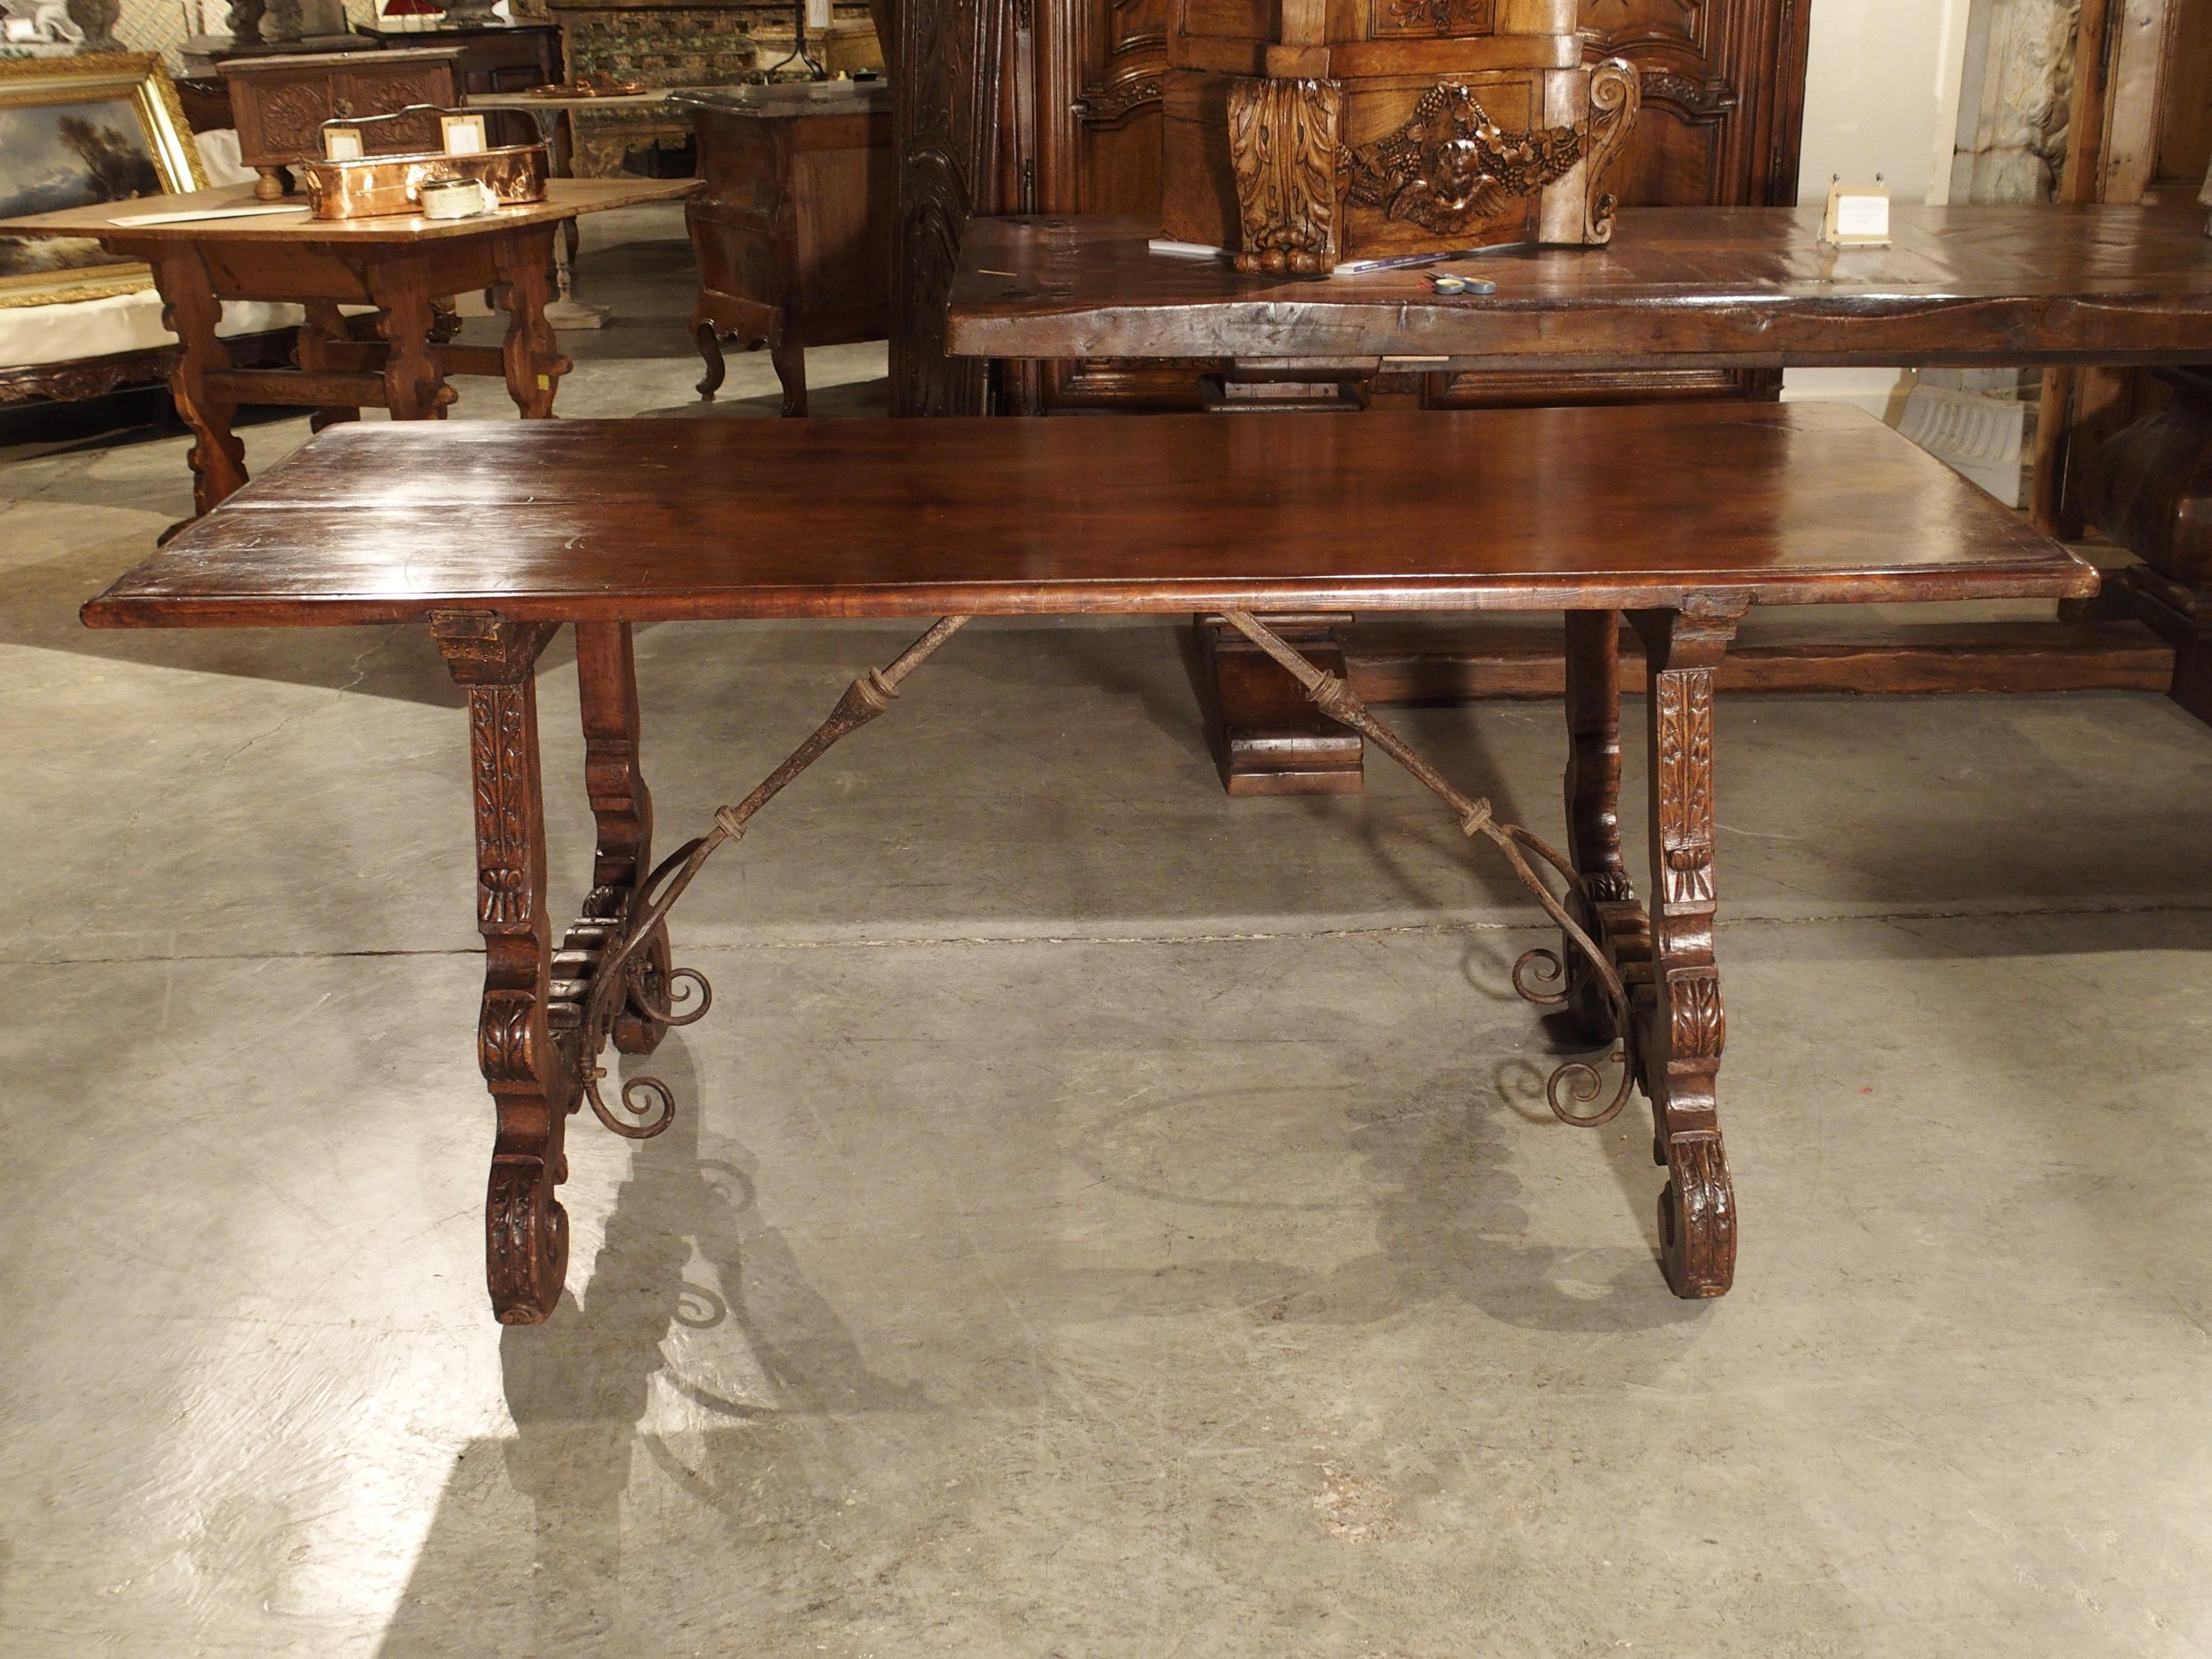 Hand-Carved Antique Walnut and Iron Table from Spain, circa 1800